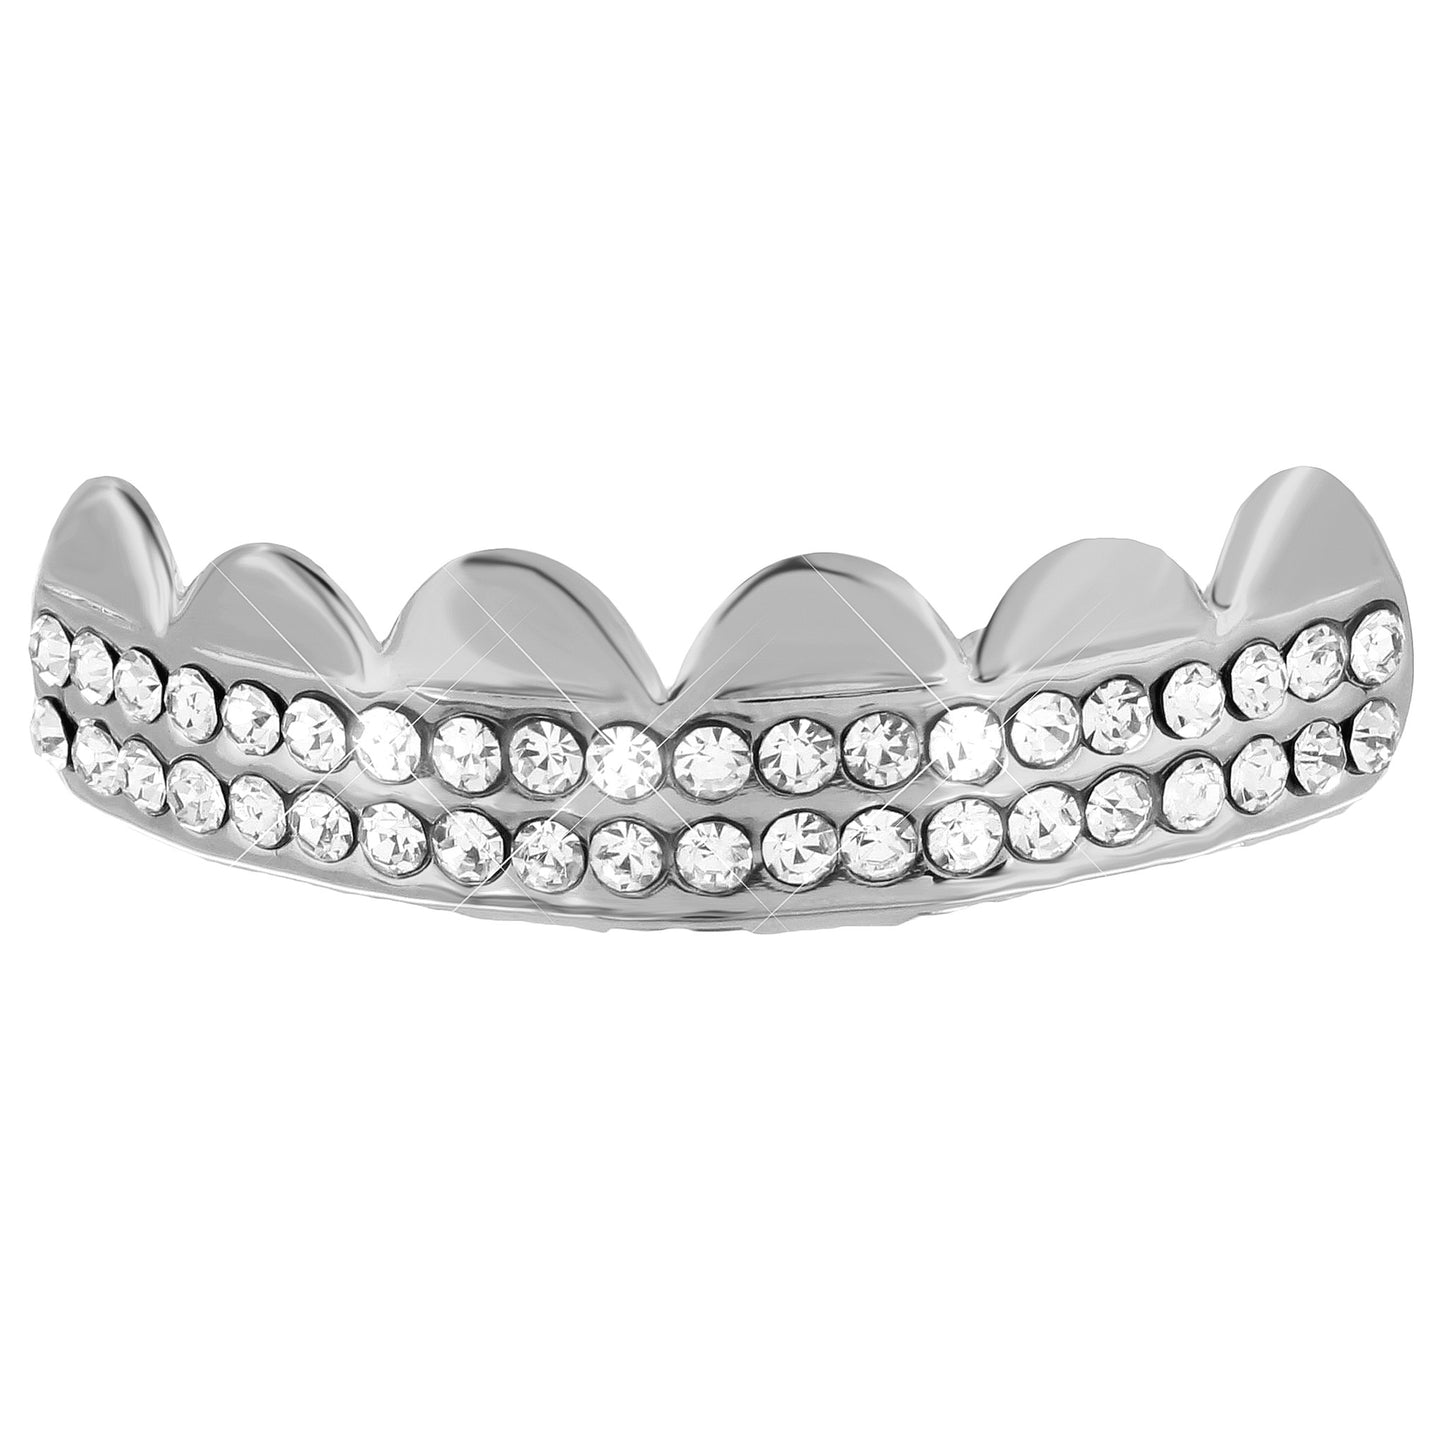 Top Grillz White Finish For Top Teeth Mens